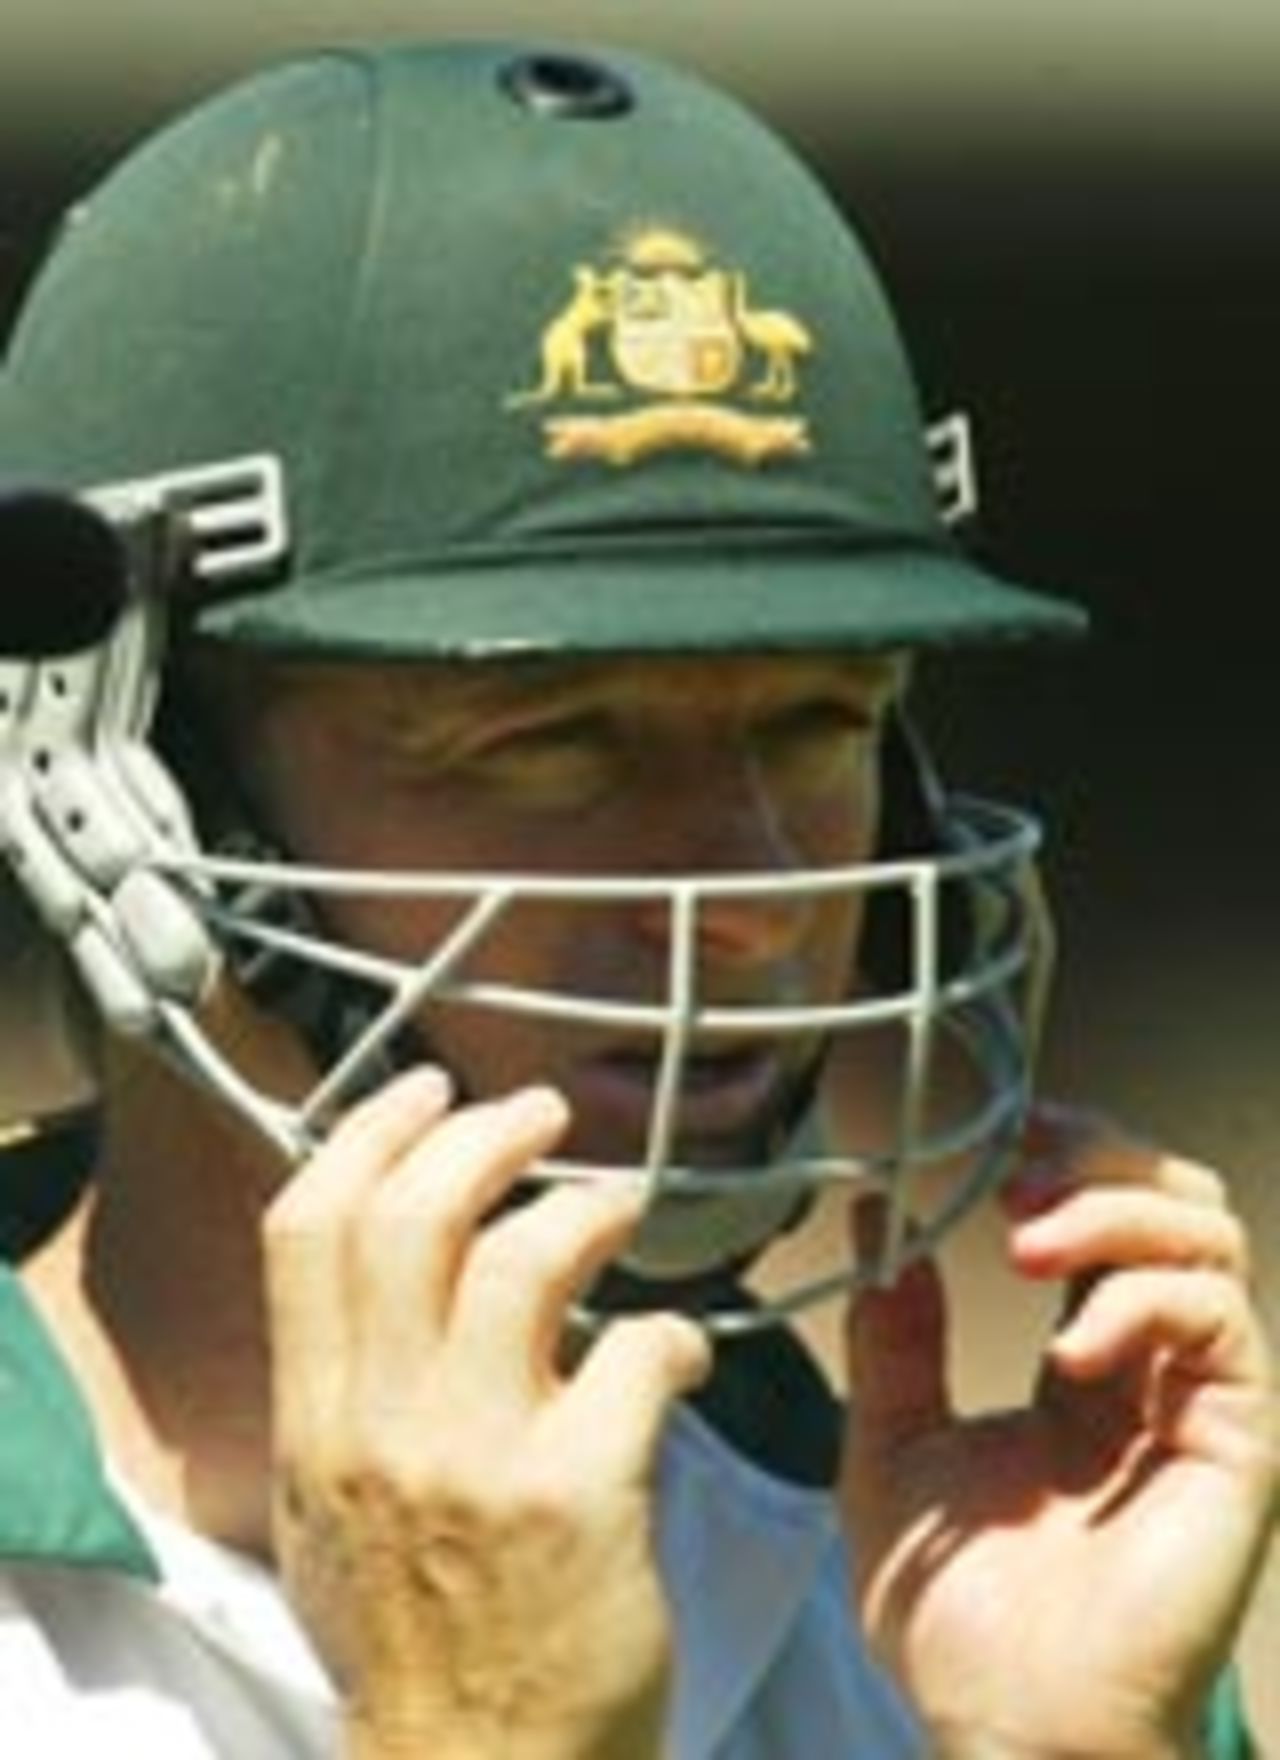 Steve Waugh puts on his helmet in the nets before the Test against India, Melbourne, December 24, 2003